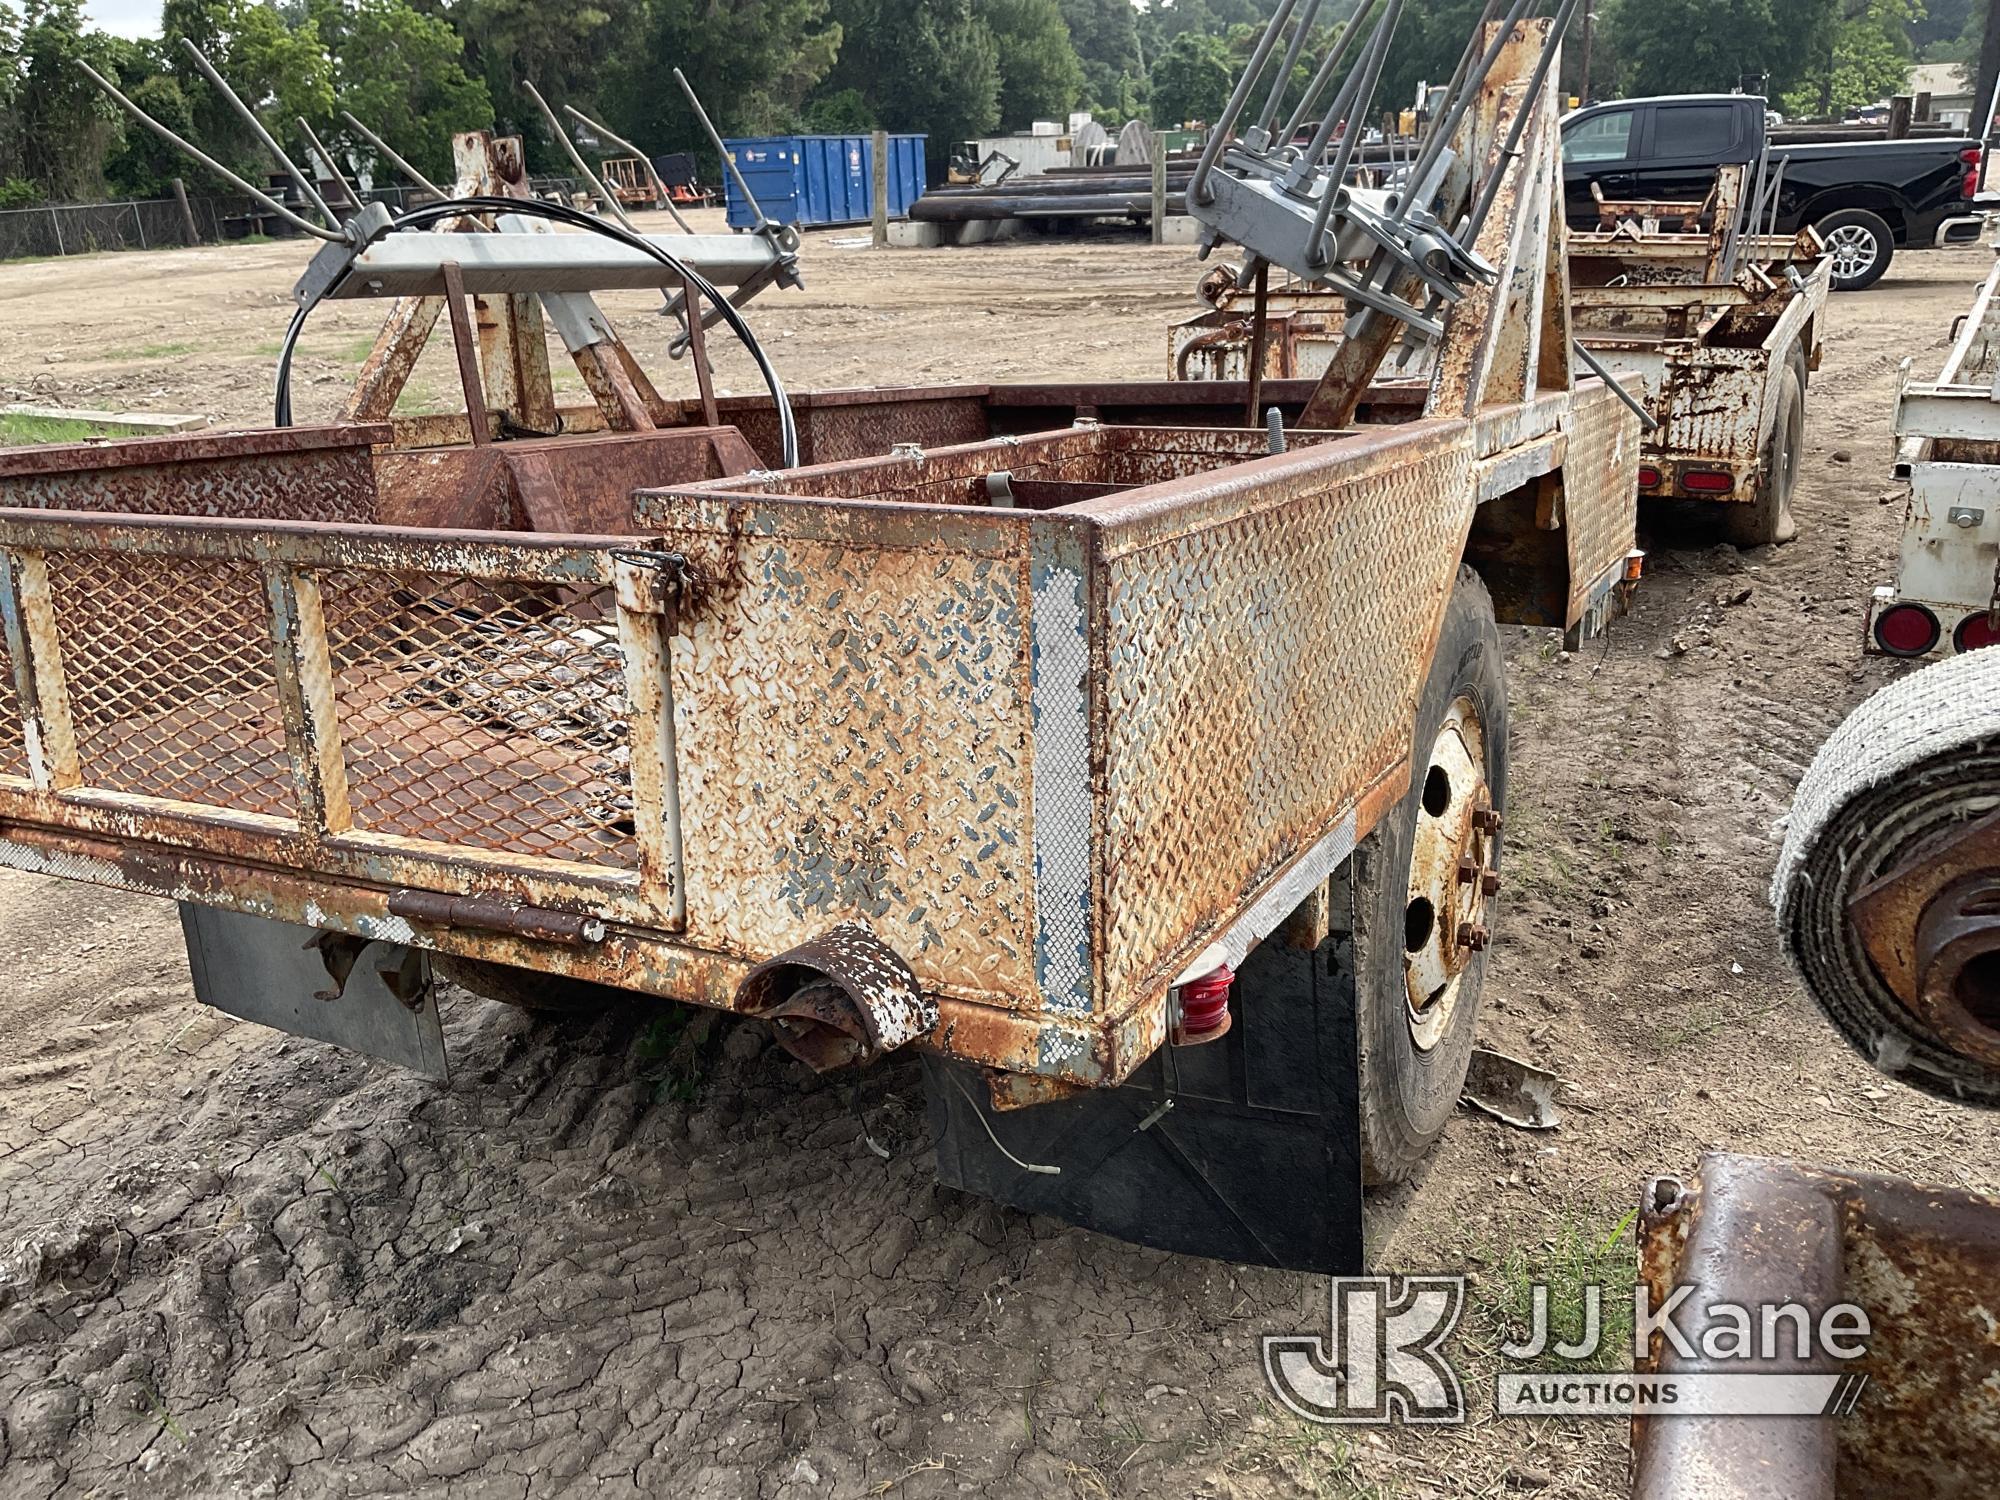 (Cypress, TX) 1998 Material Trailer No Title) (stands and rolls